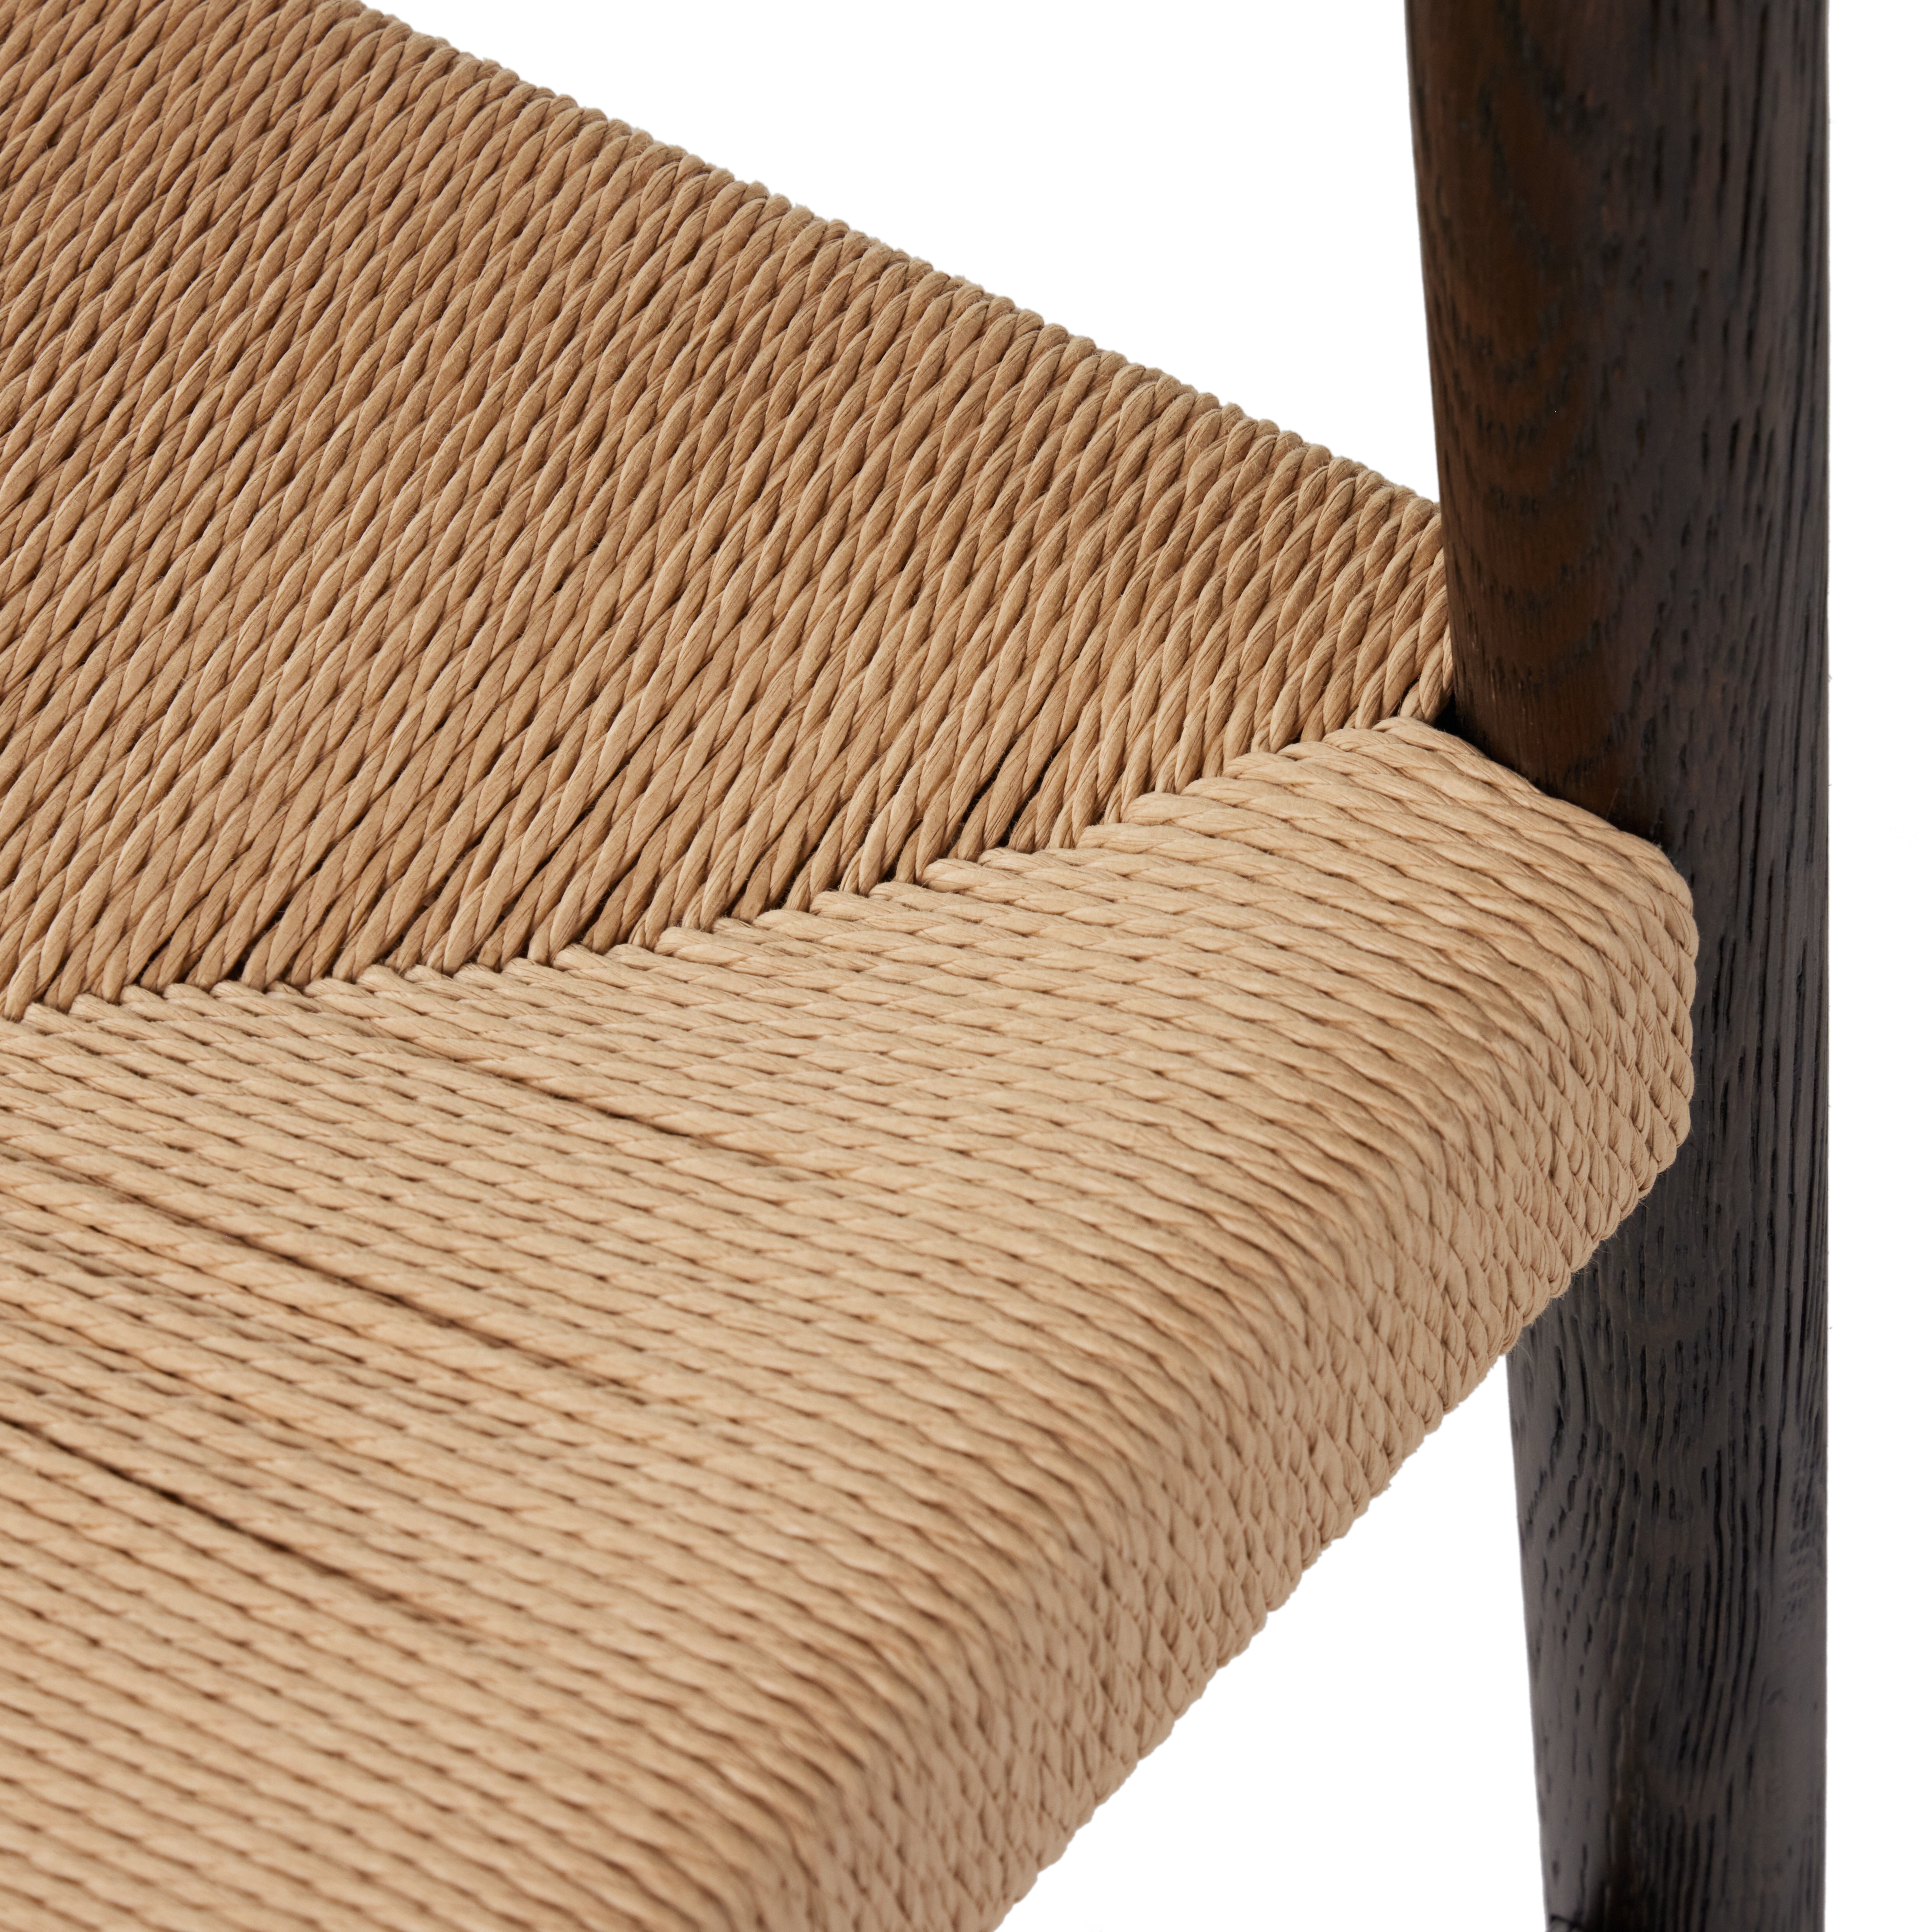 Glenmore Woven Dining Chair-Light Carbon - Image 6